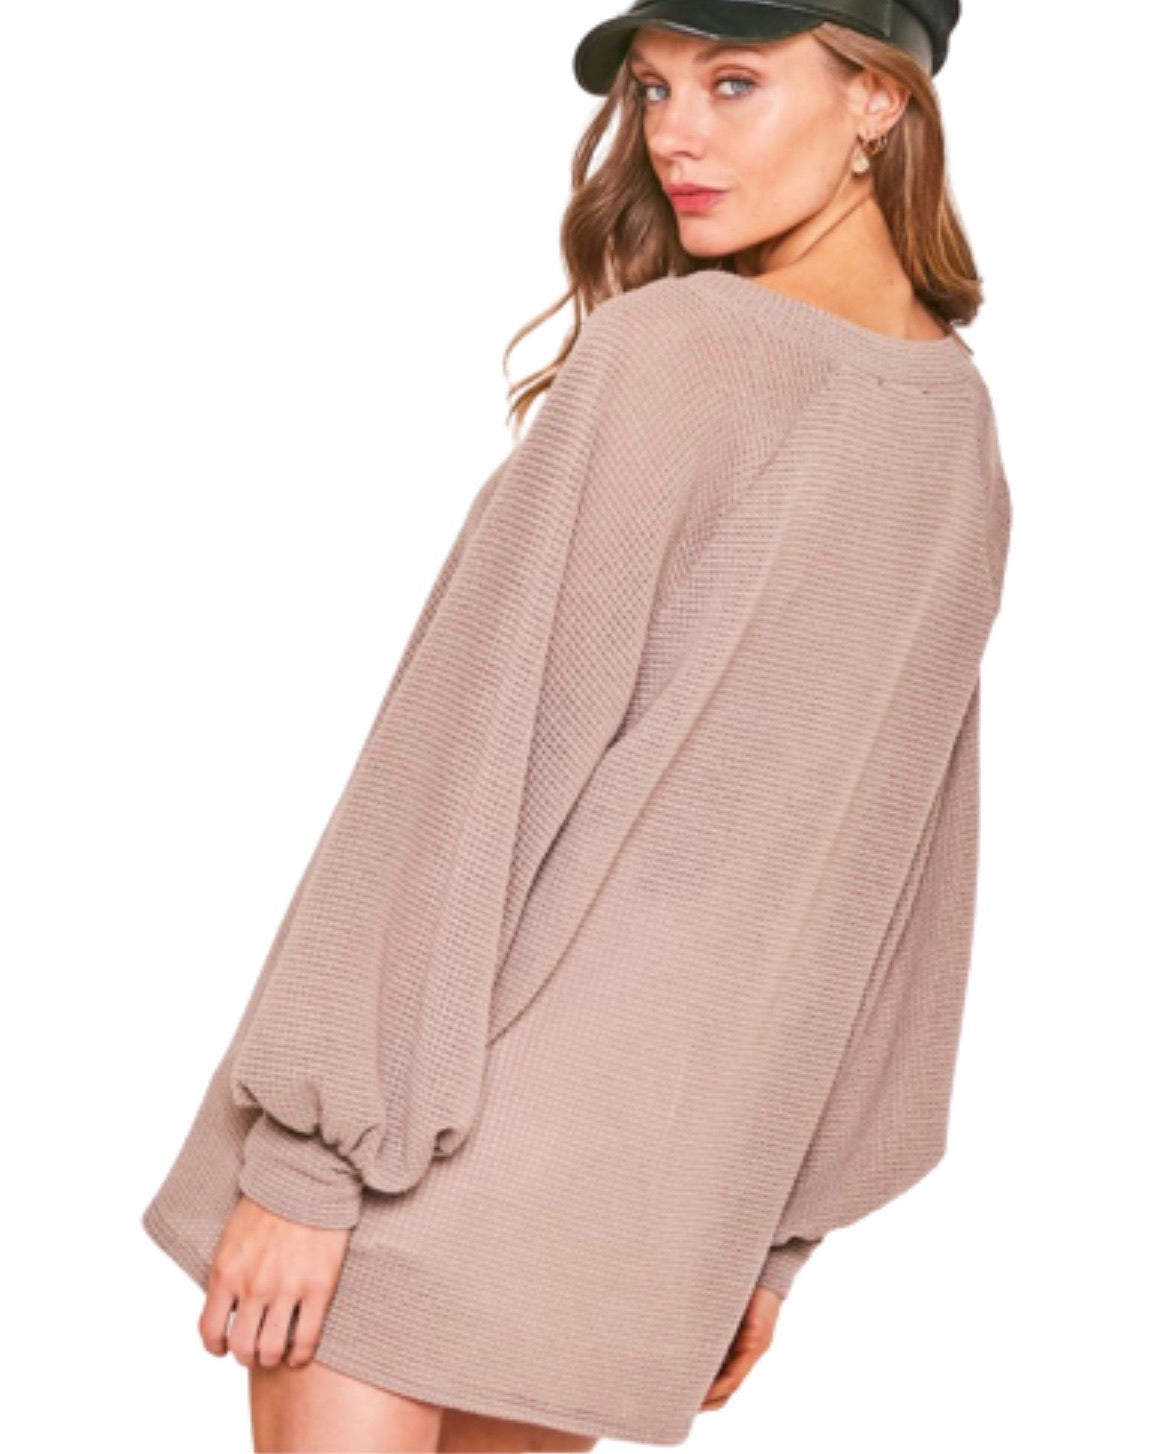 Glamco Boutique  Sale ! Autumn Textured Knit Long Sleeve Top in Terra Cotta